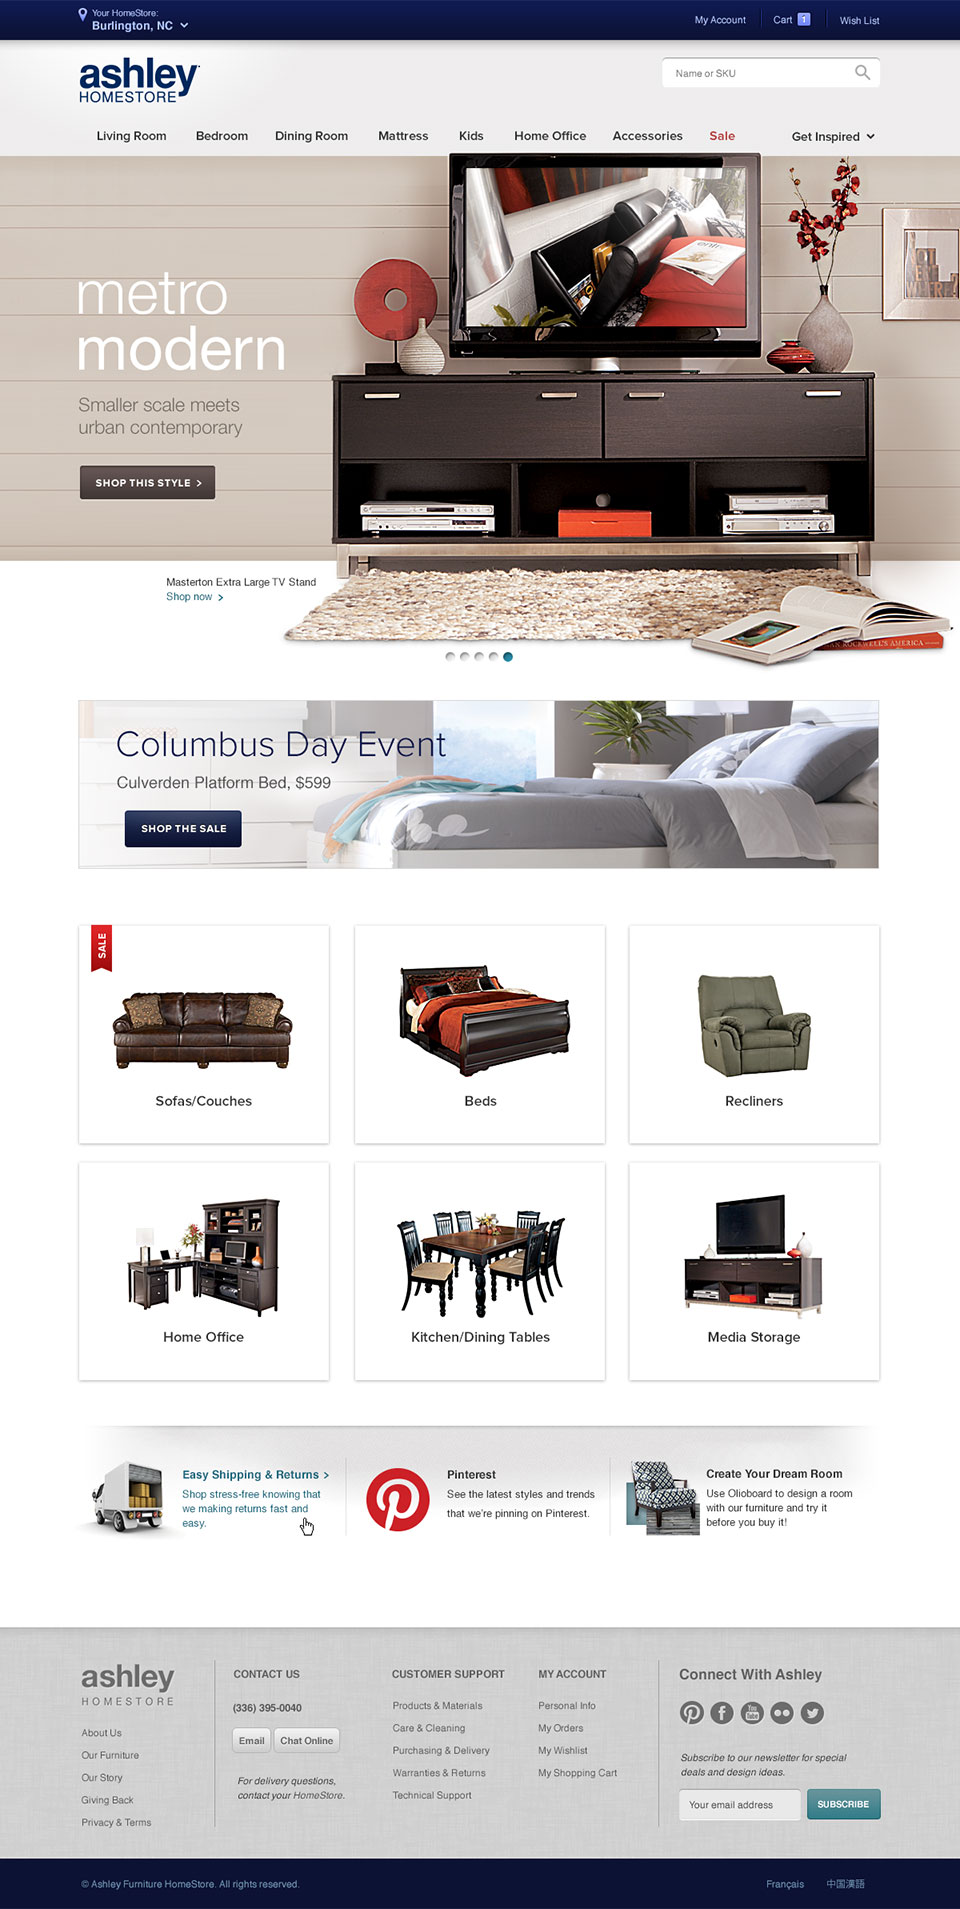 Ashley HomeStore Collection Page